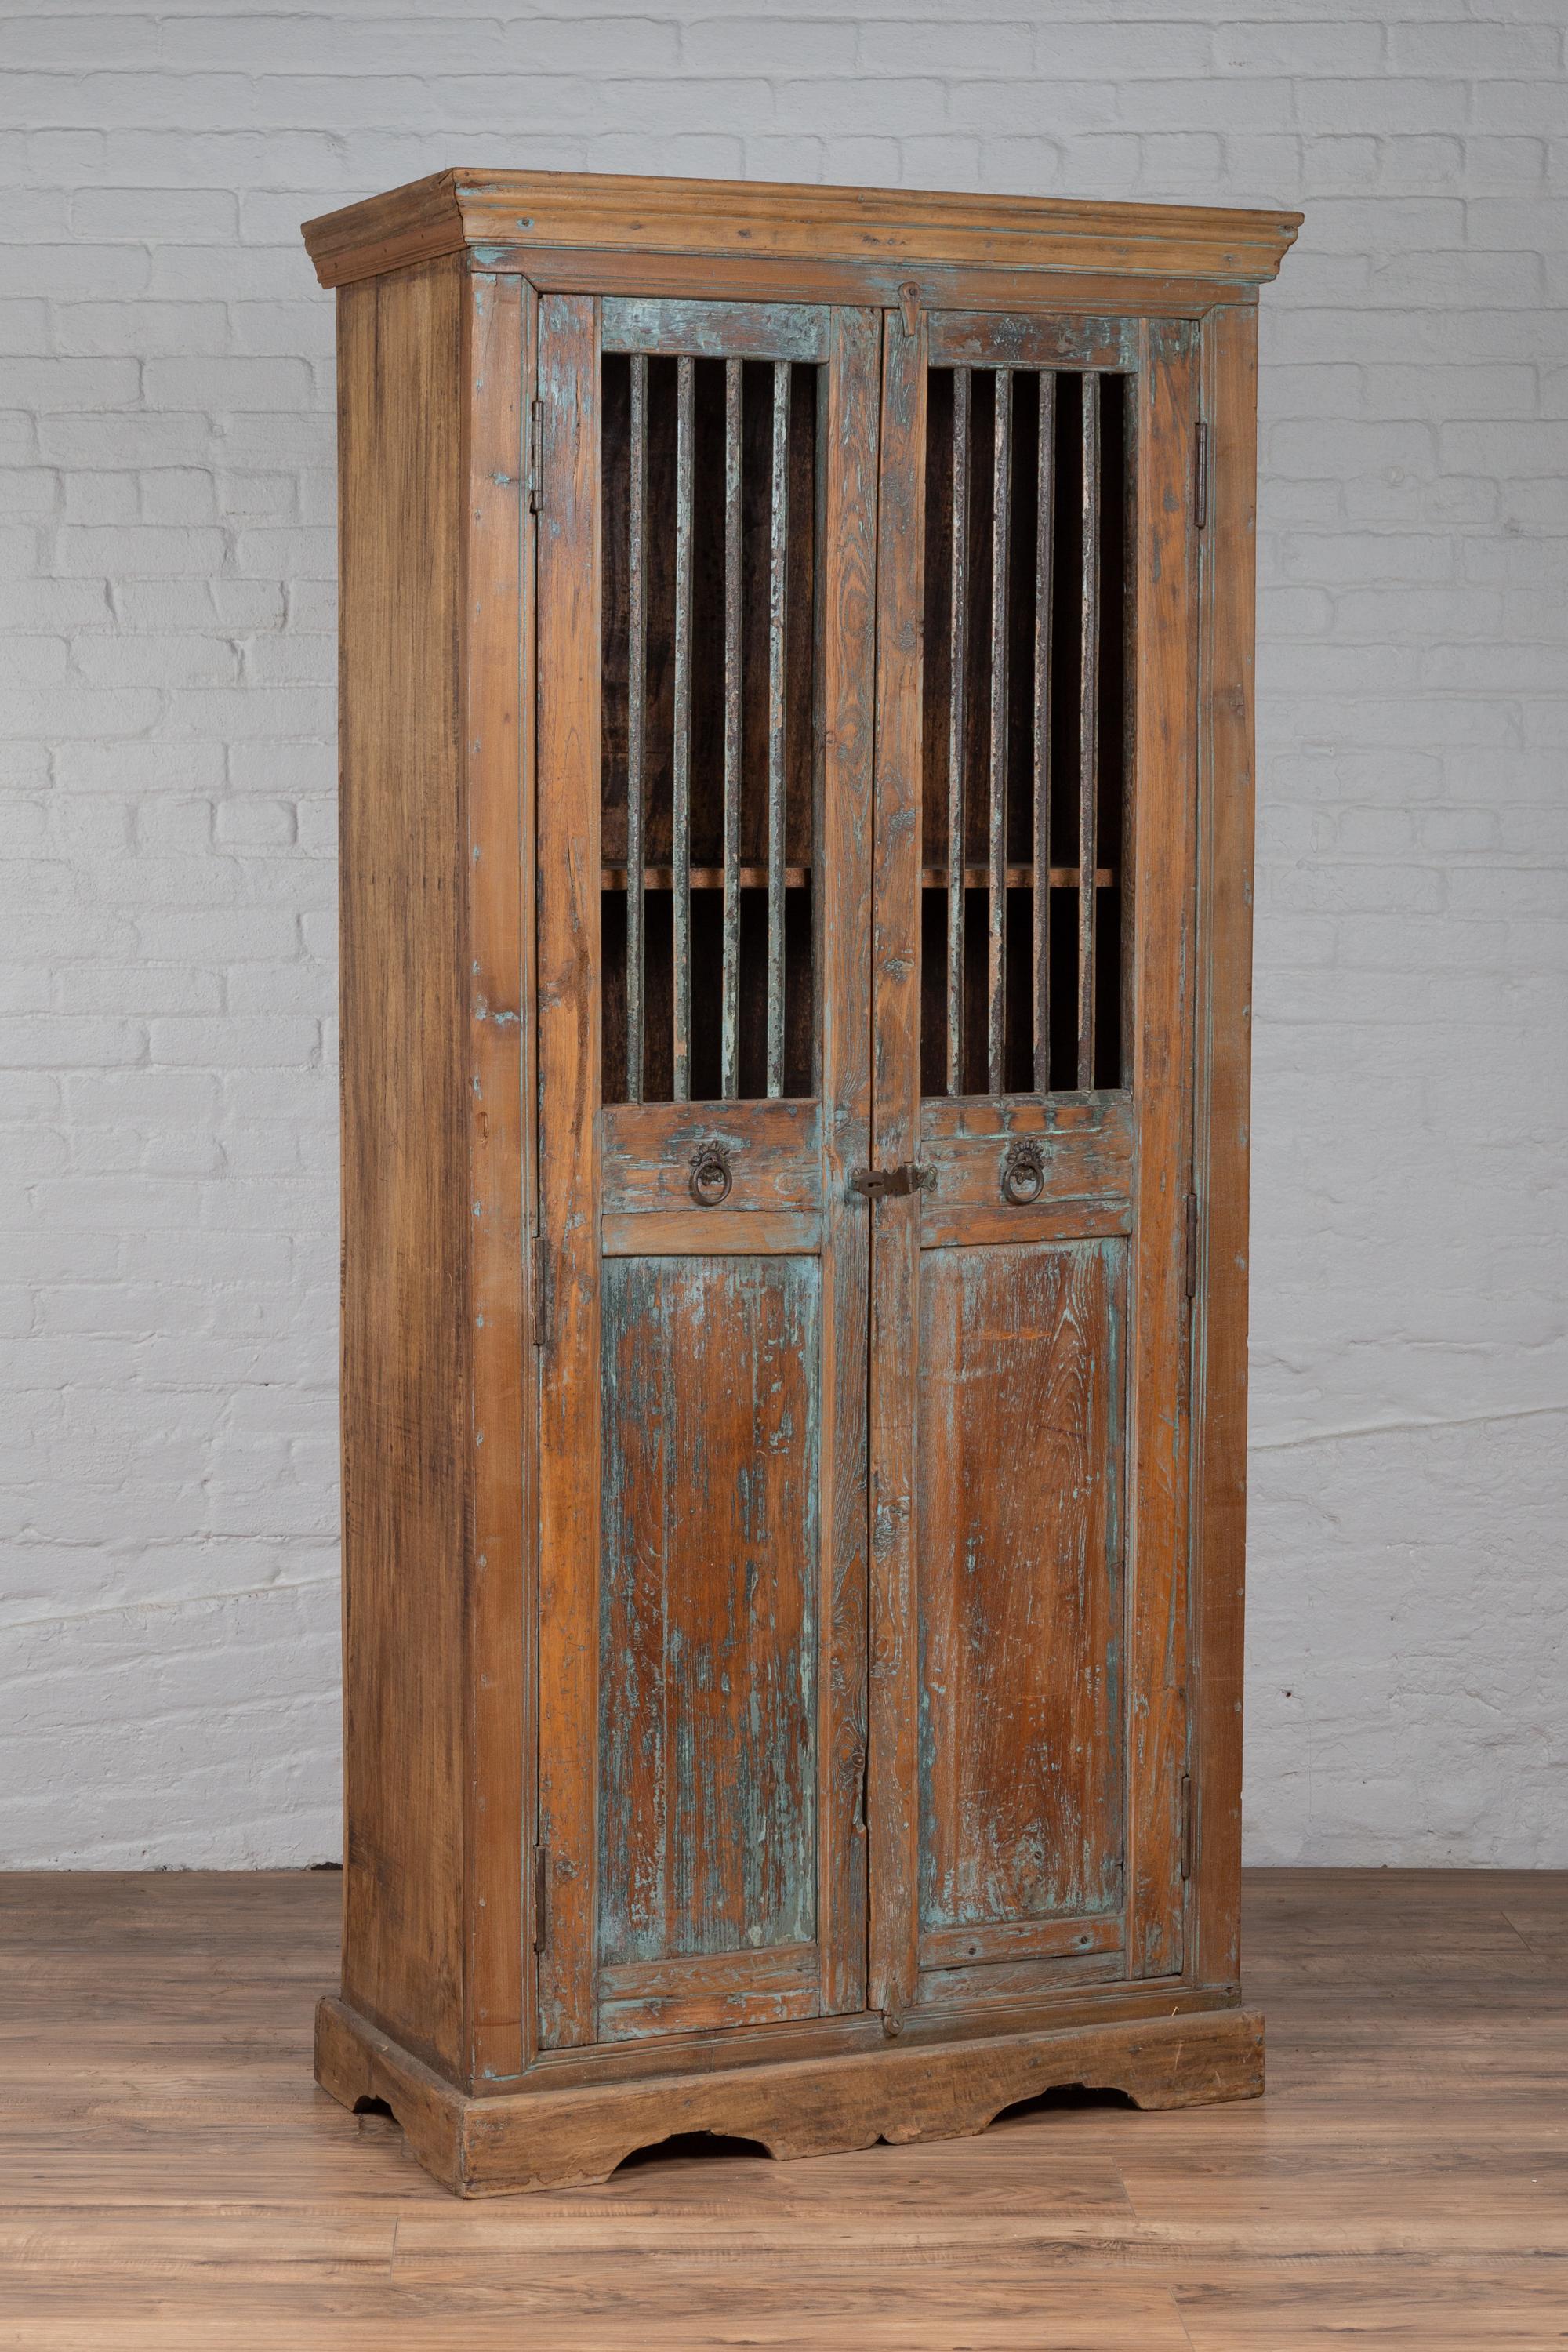 Early 20th Century Indian Rustic Wooden Kitchen Cabinet with Distressed Finish For Sale 3